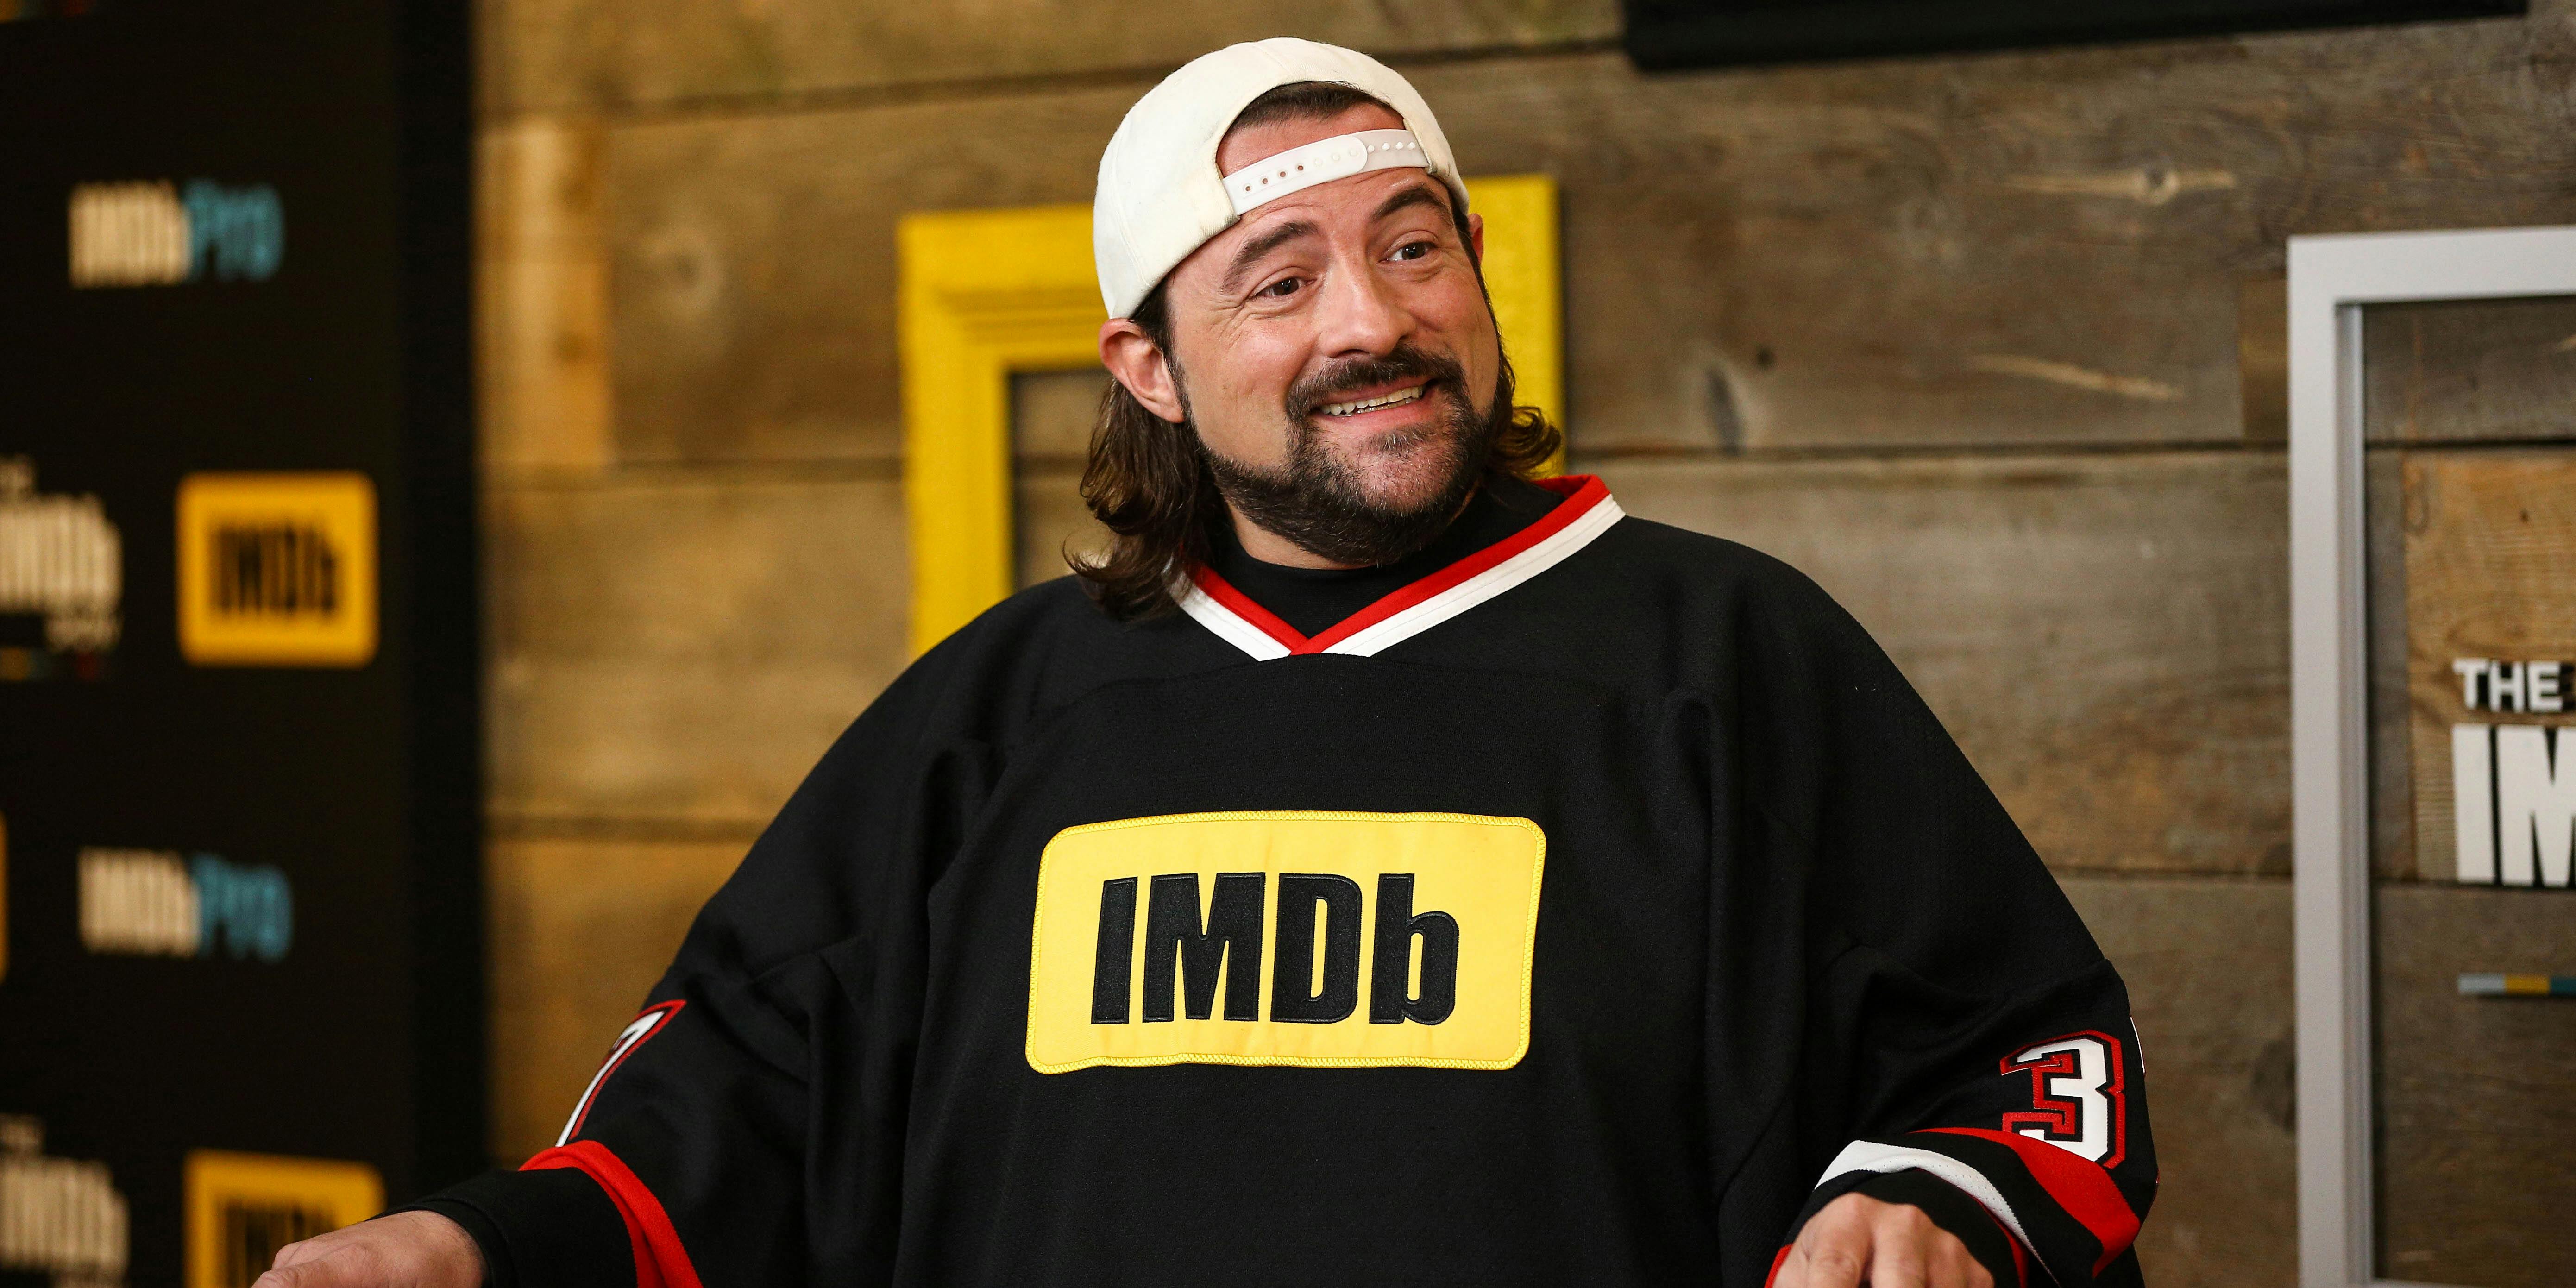 Kevin Smith wears an IMDb shirt during an interview. He is crowdfunding for his next comedy series 'Hollyweed'